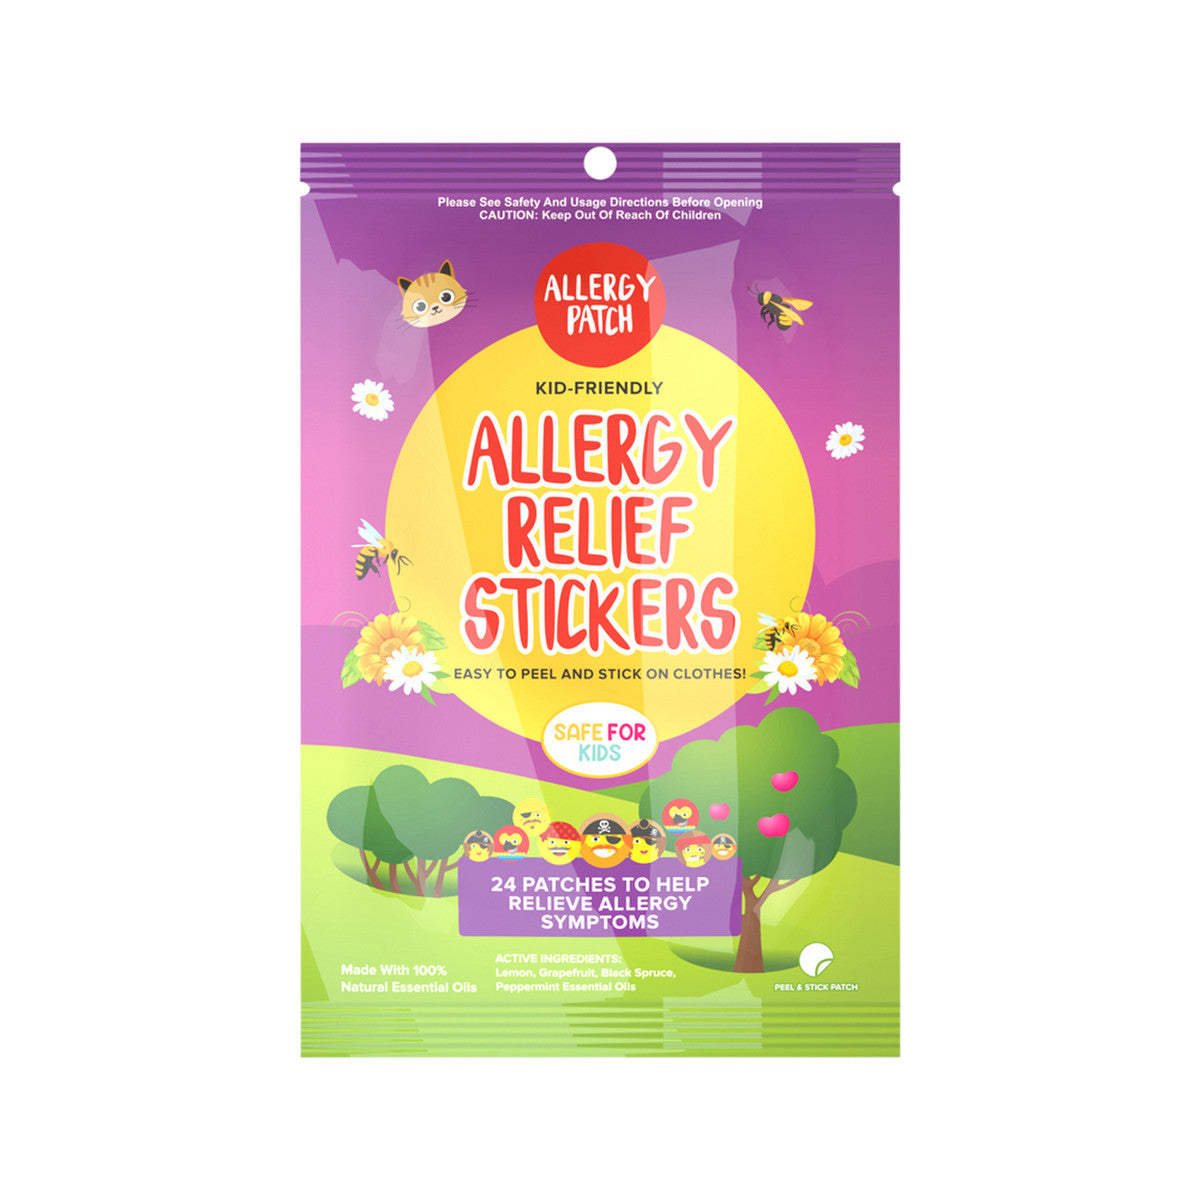 NATPAT (The Natural Patch Co) - AllergyPatch Organic Allergy Relief Stickers